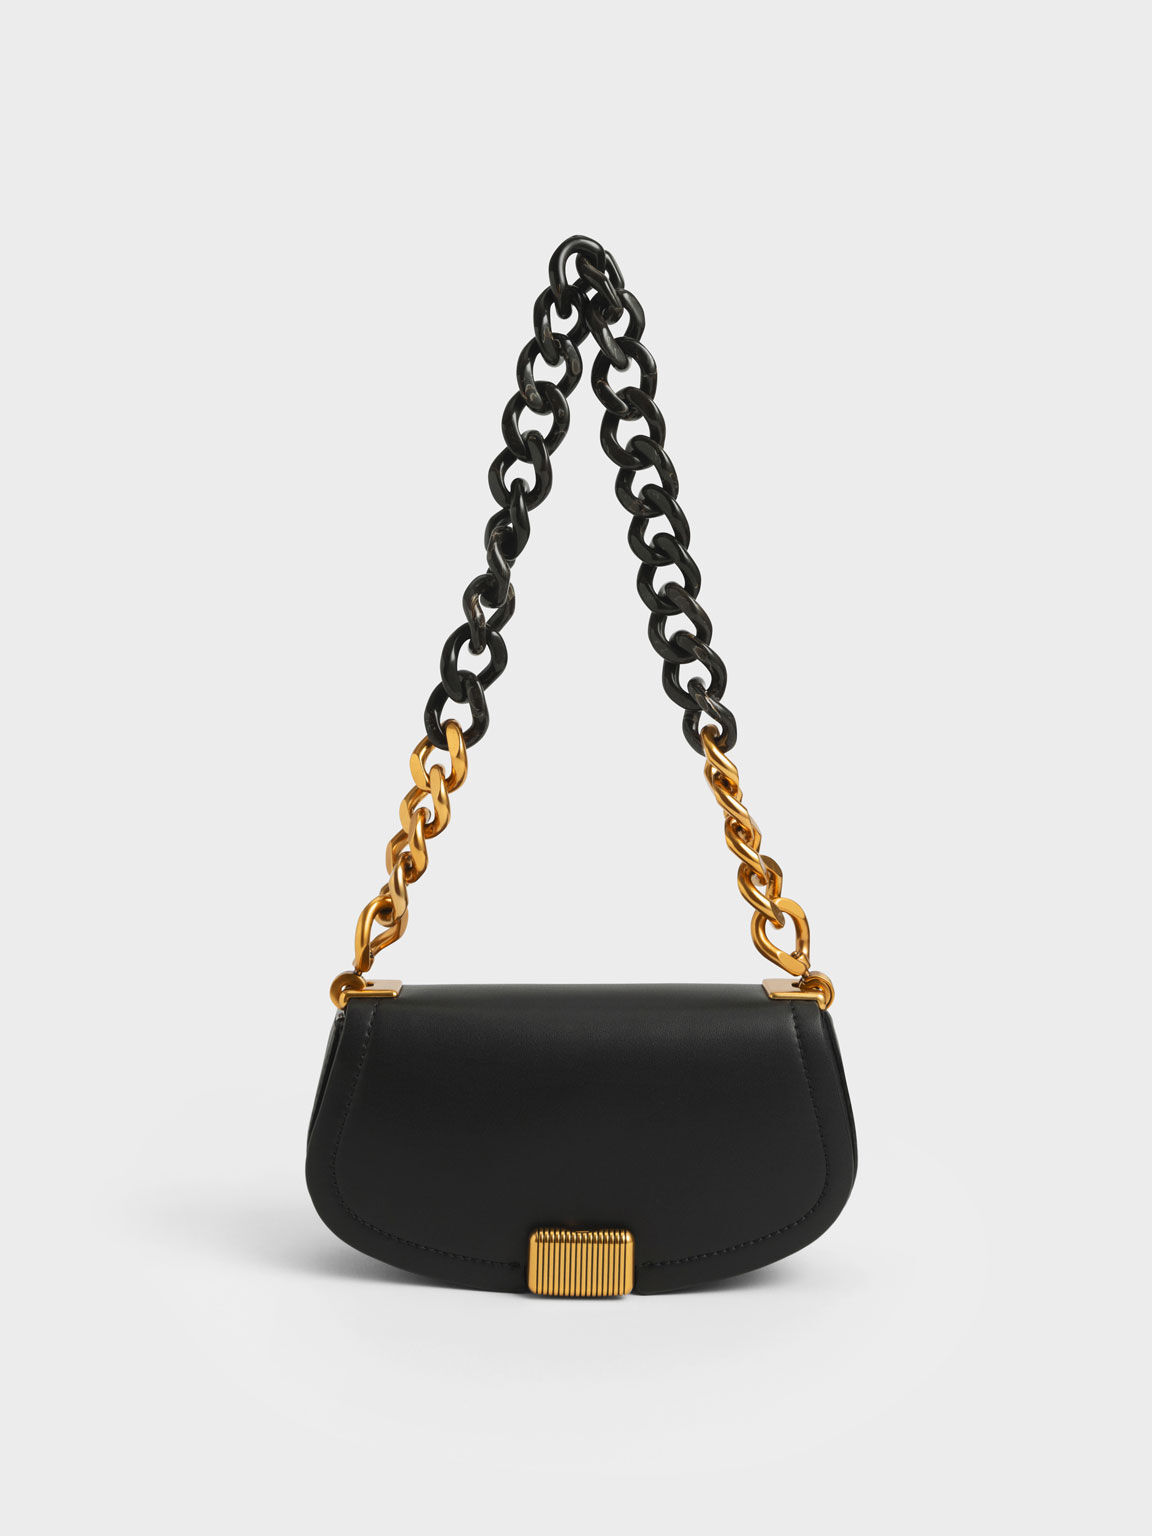 Trendy chains you NEED for your bags